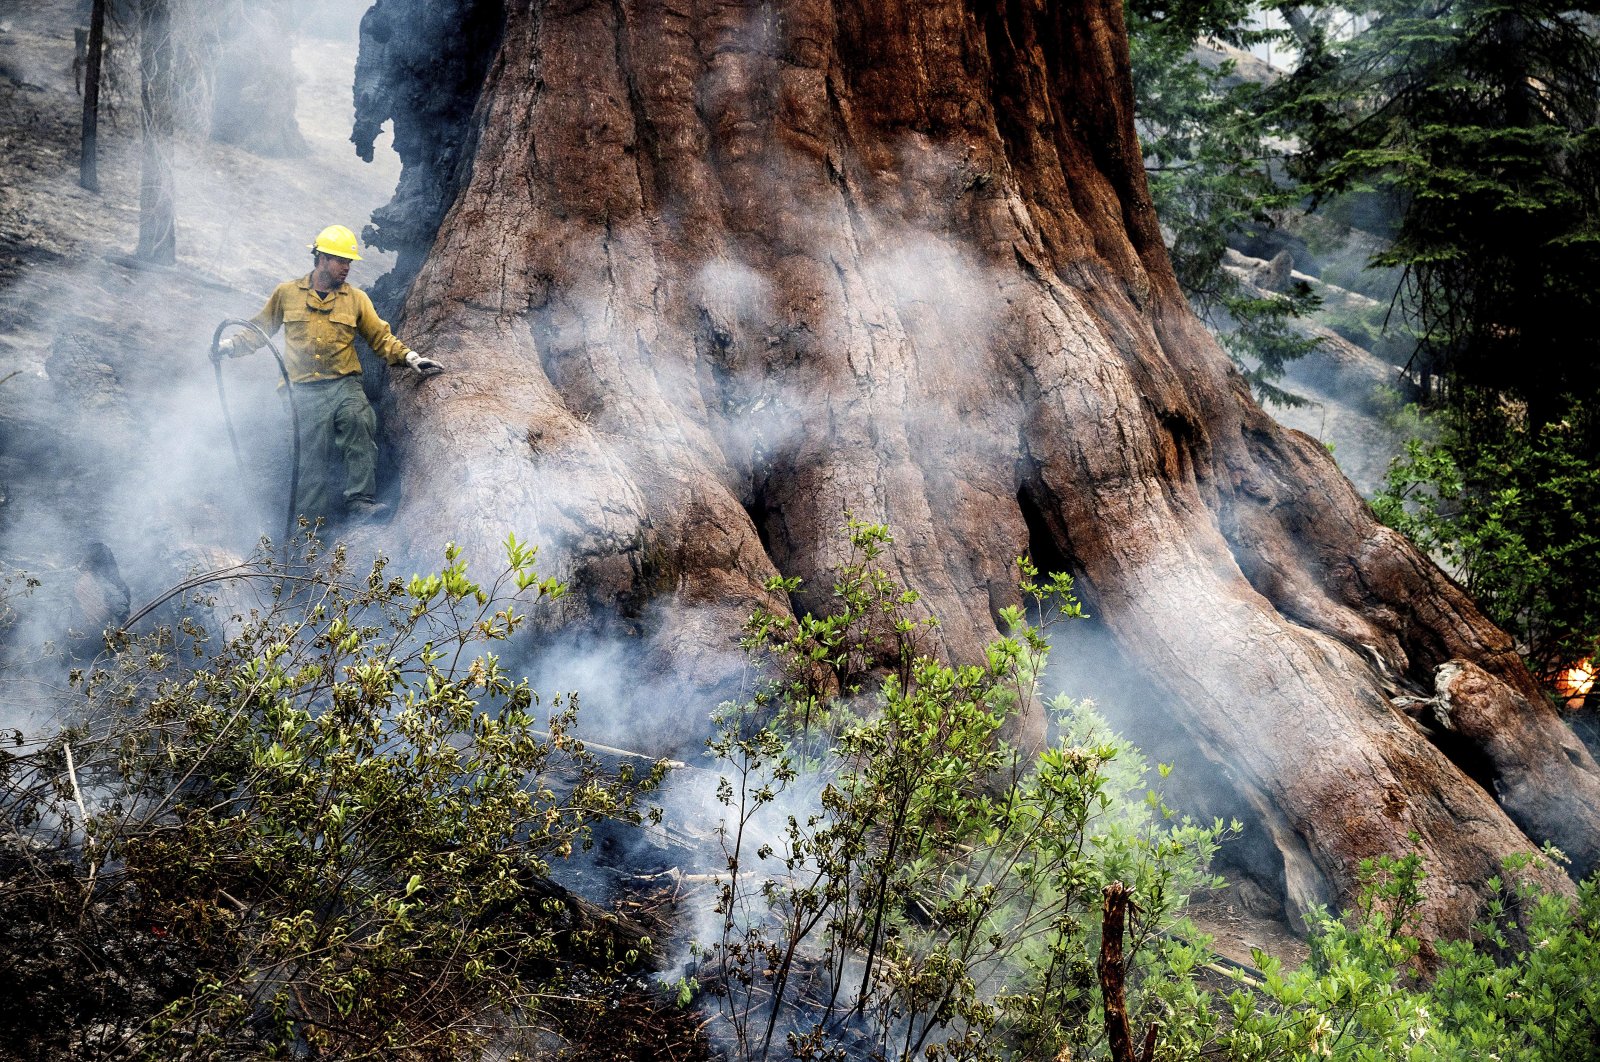 A firefighter protects a sequoia tree as the Washburn Fire burns in Mariposa Grove of Giant Sequoias in Yosemite National Park, California, U.S., July 8, 2022. (AP Photo)